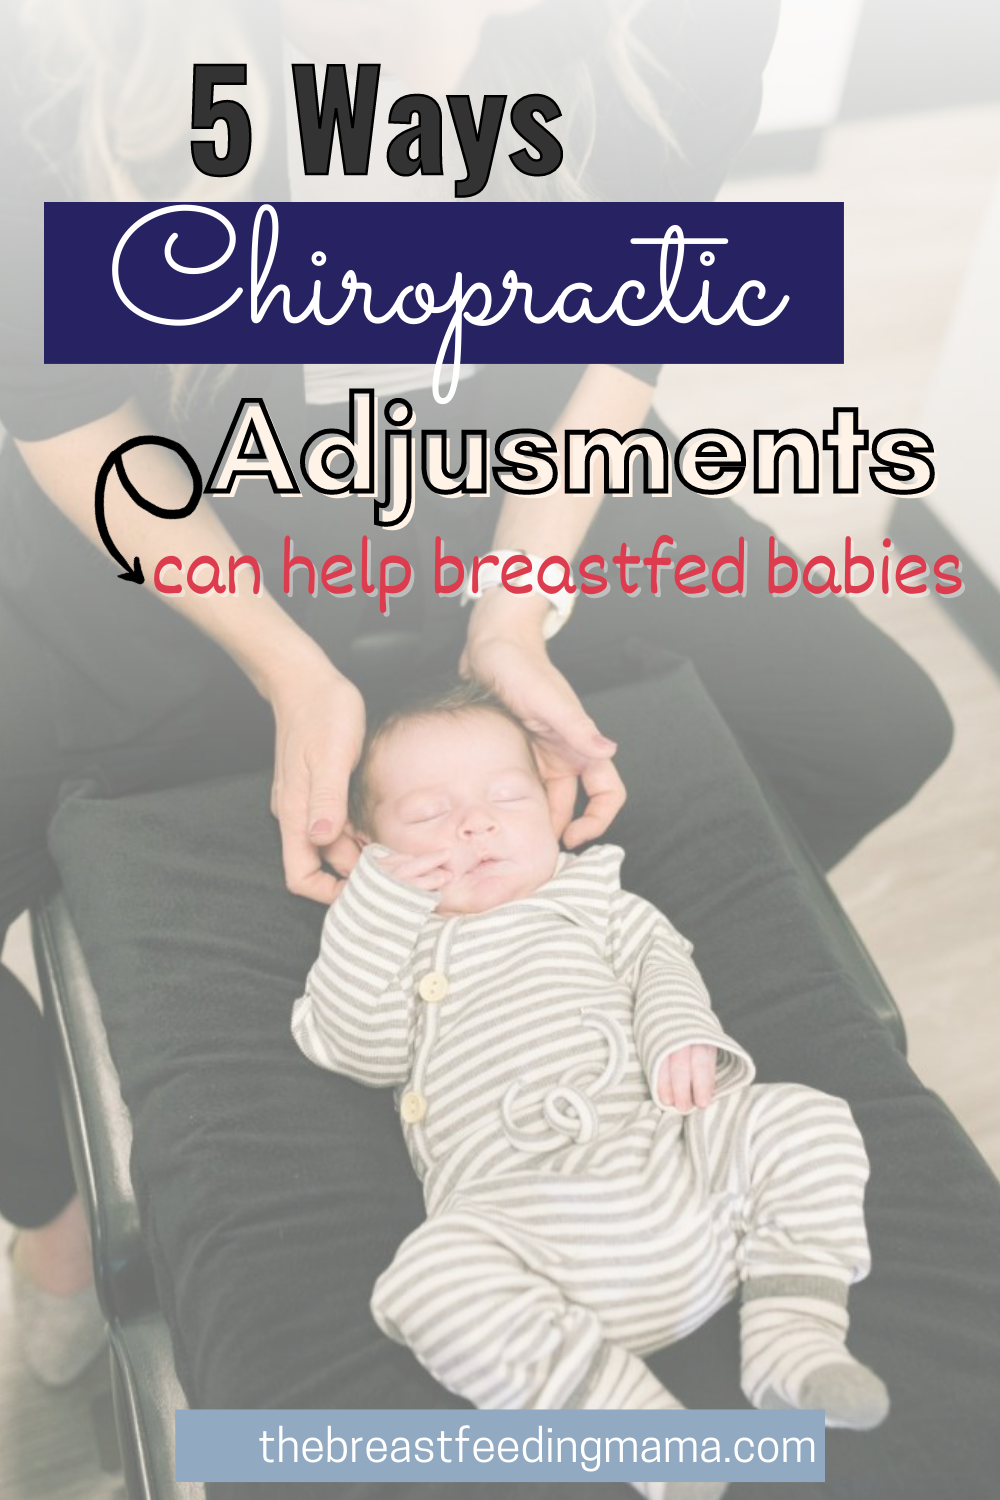 As a new mom, you want to do everything you can to ensure a successful breastfeeding experience for both you and your baby. While there are many variables that can impact this process, did you know that infant chiropractic adjustment could be one of them? Read on to learn 5 ways that gentle, specific chiropractic care can help improve breastfeeding for both you and your little one!